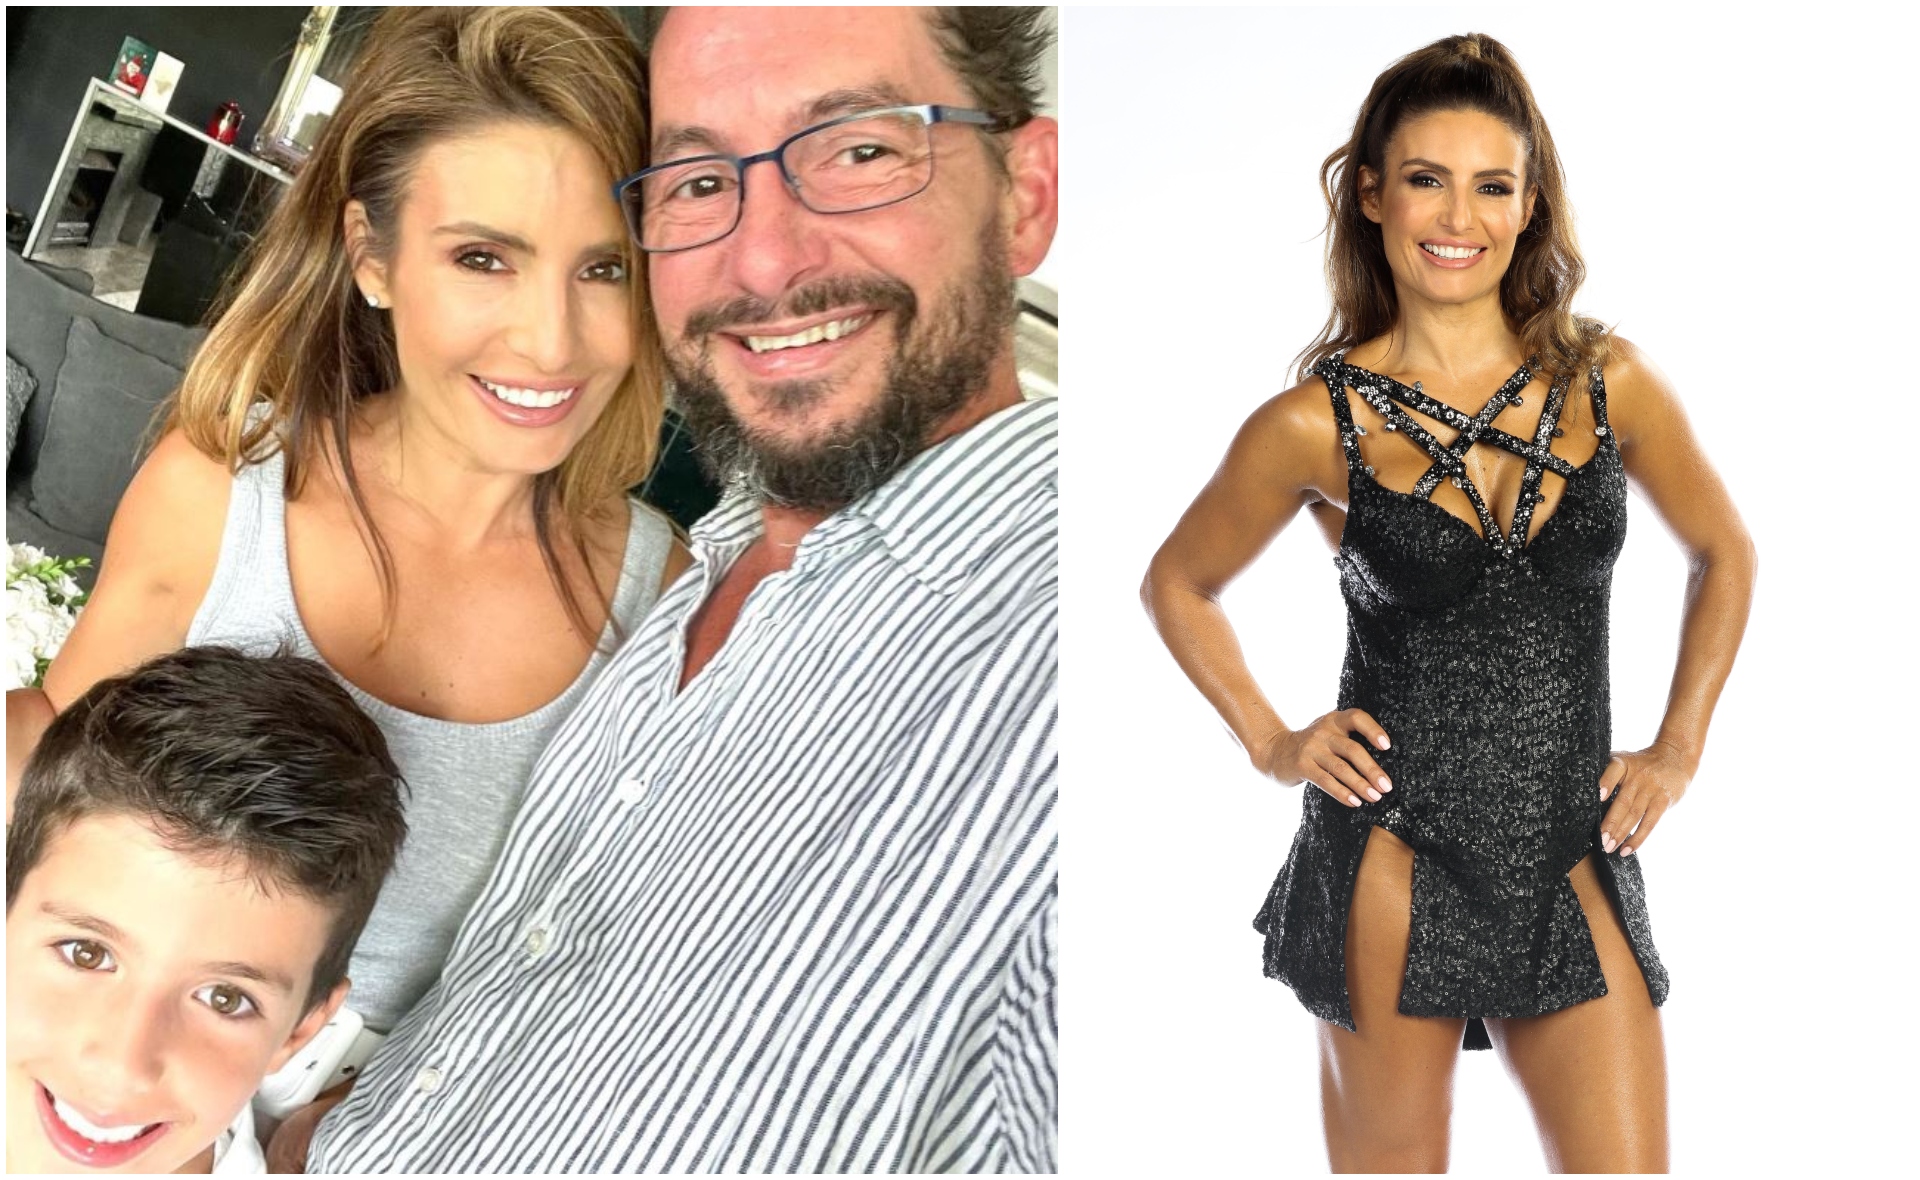 “I’m doing this for my boys”: Ada Nicodemou reveals which she’s tackling this season of DWTS differently